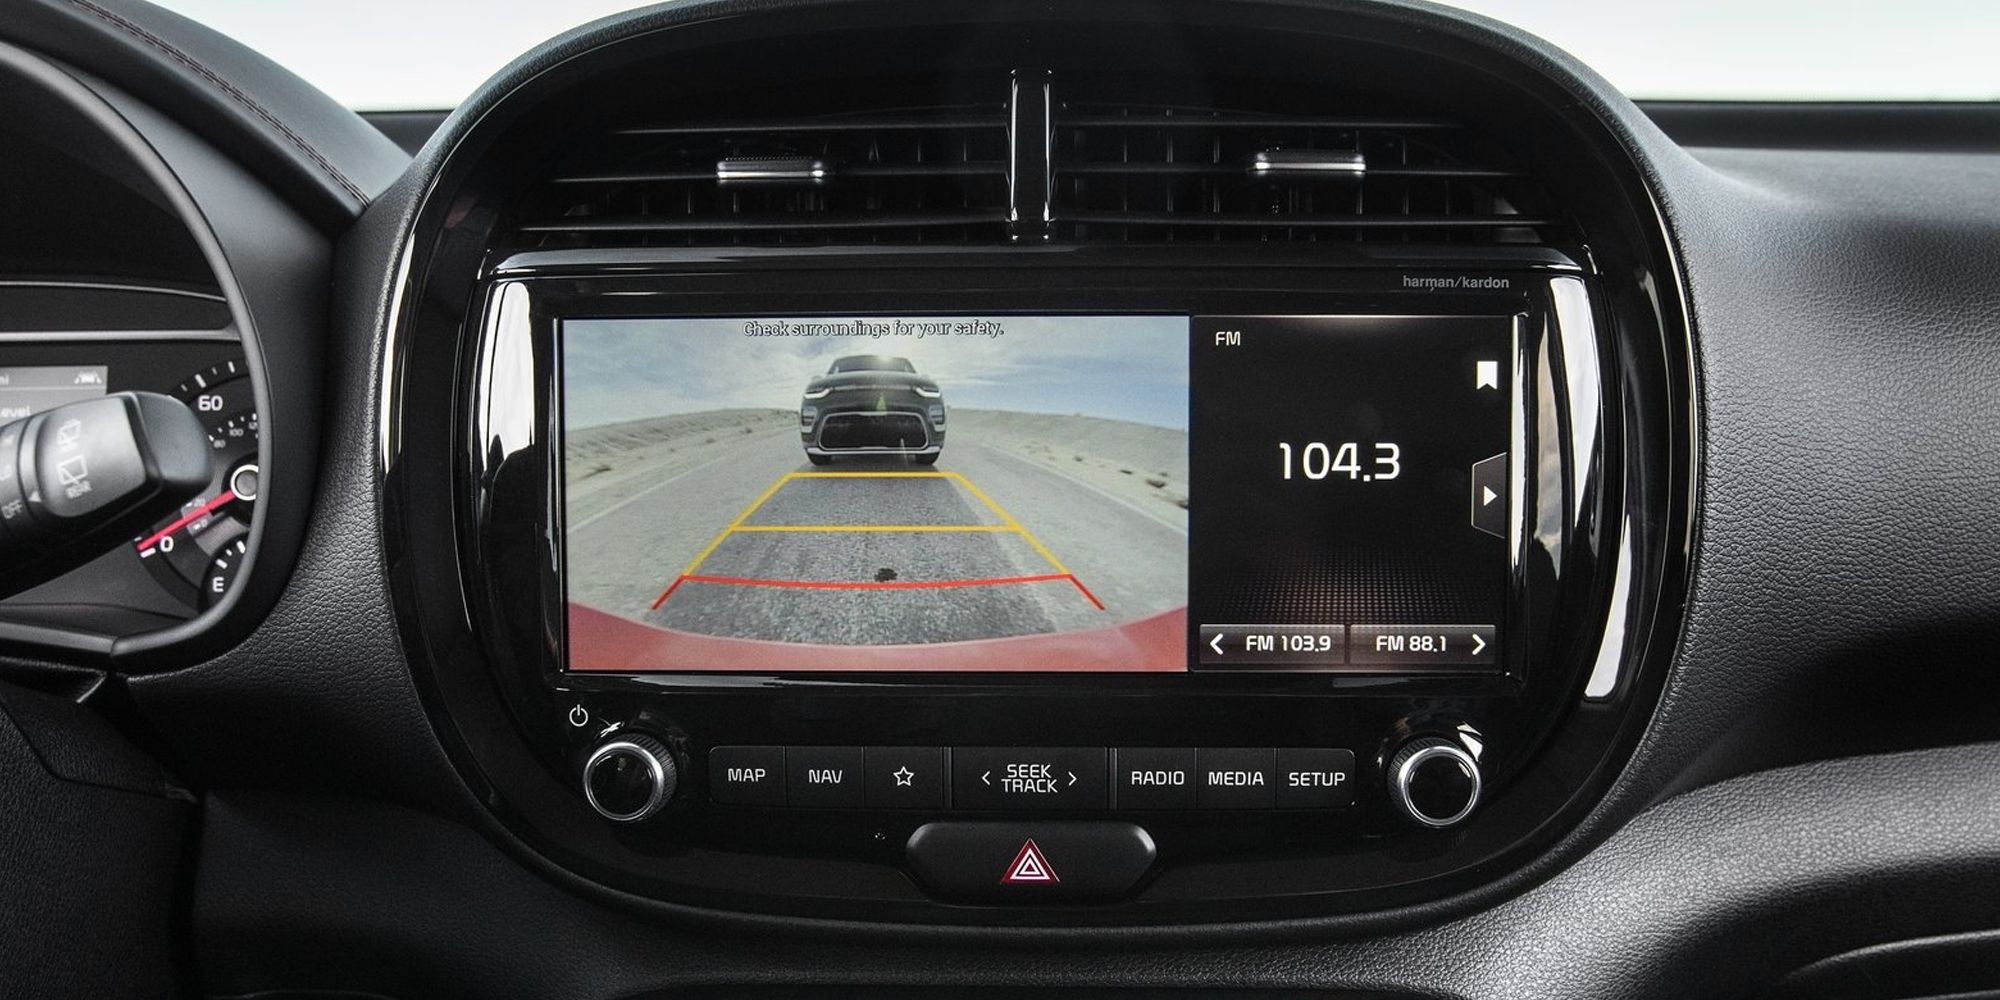 The infotainment system in the Kia Soul, showing the backup camera and radio frequency